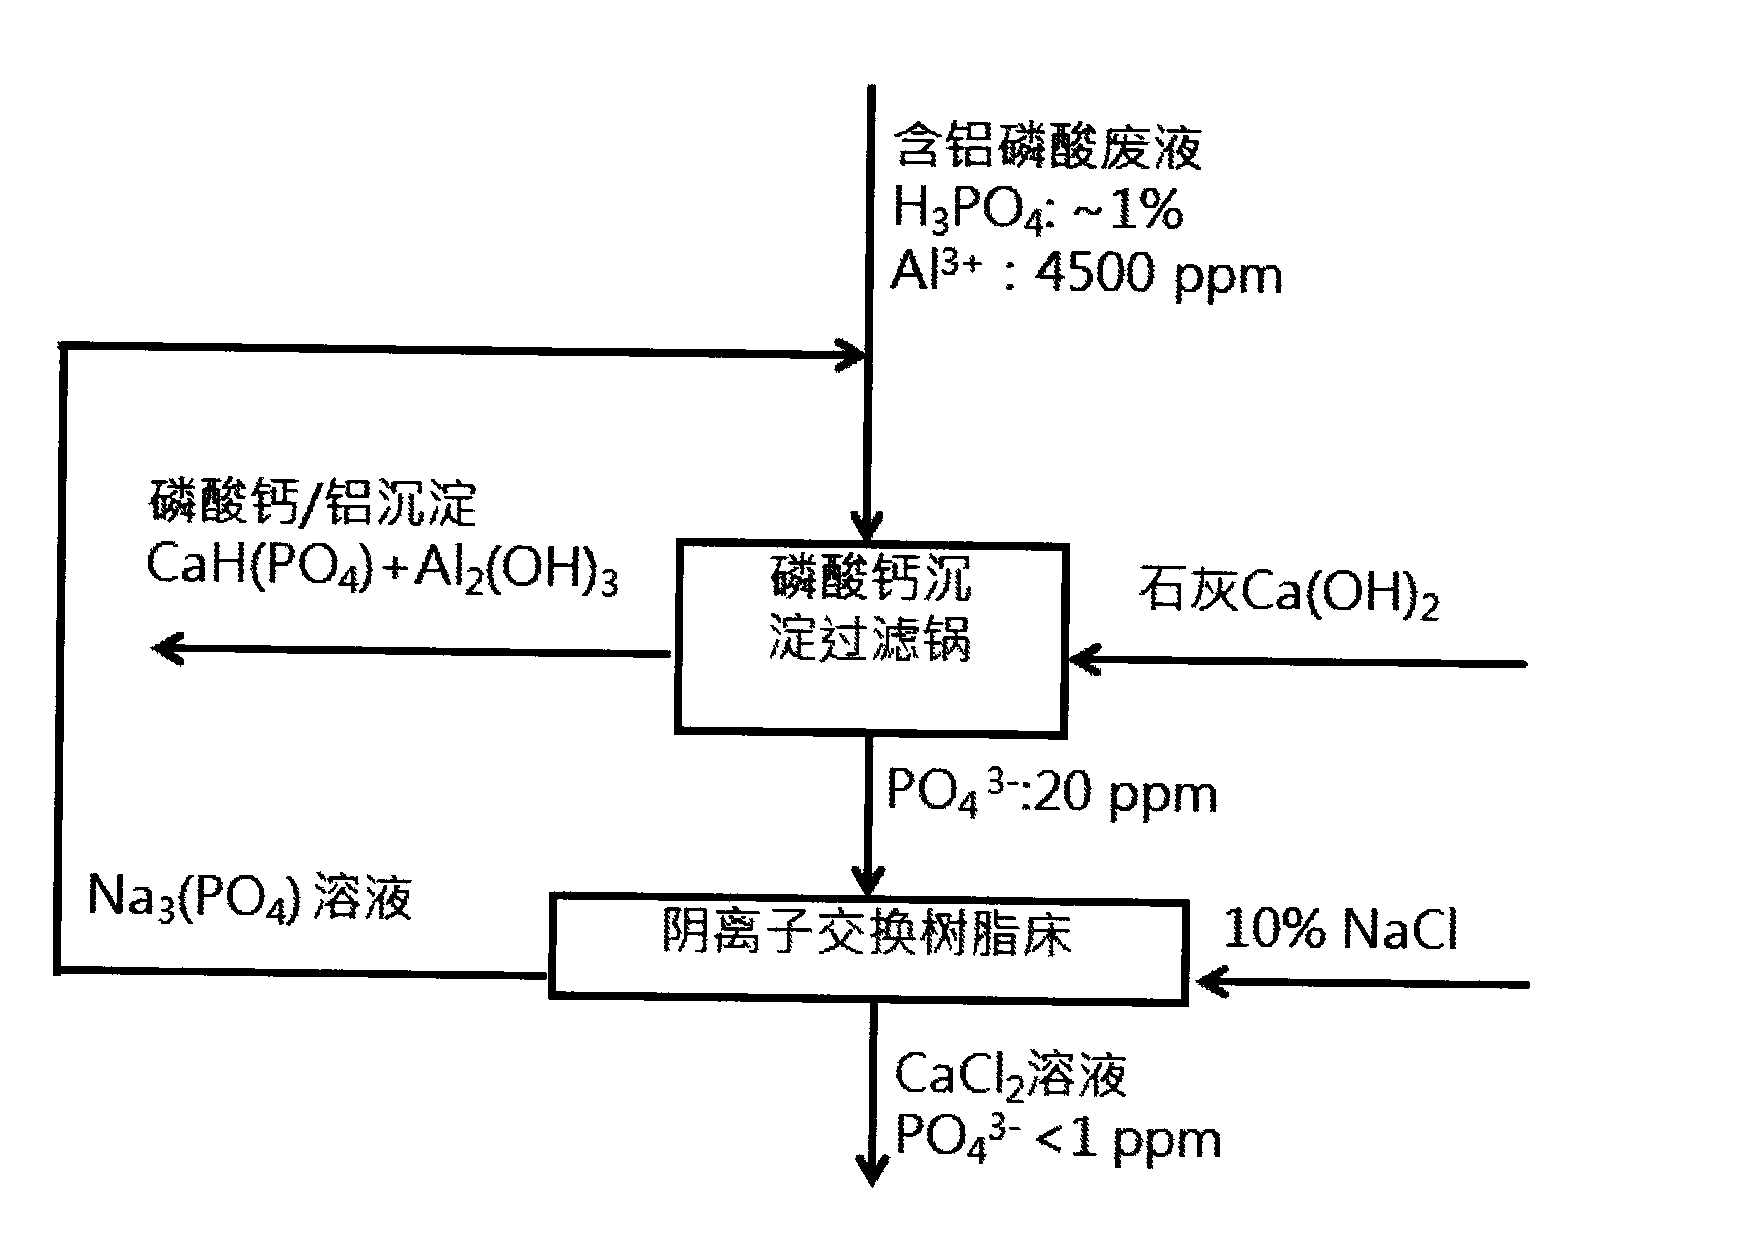 Novel process for removing phosphorus from metal-salt-containing waste phosphoric acid